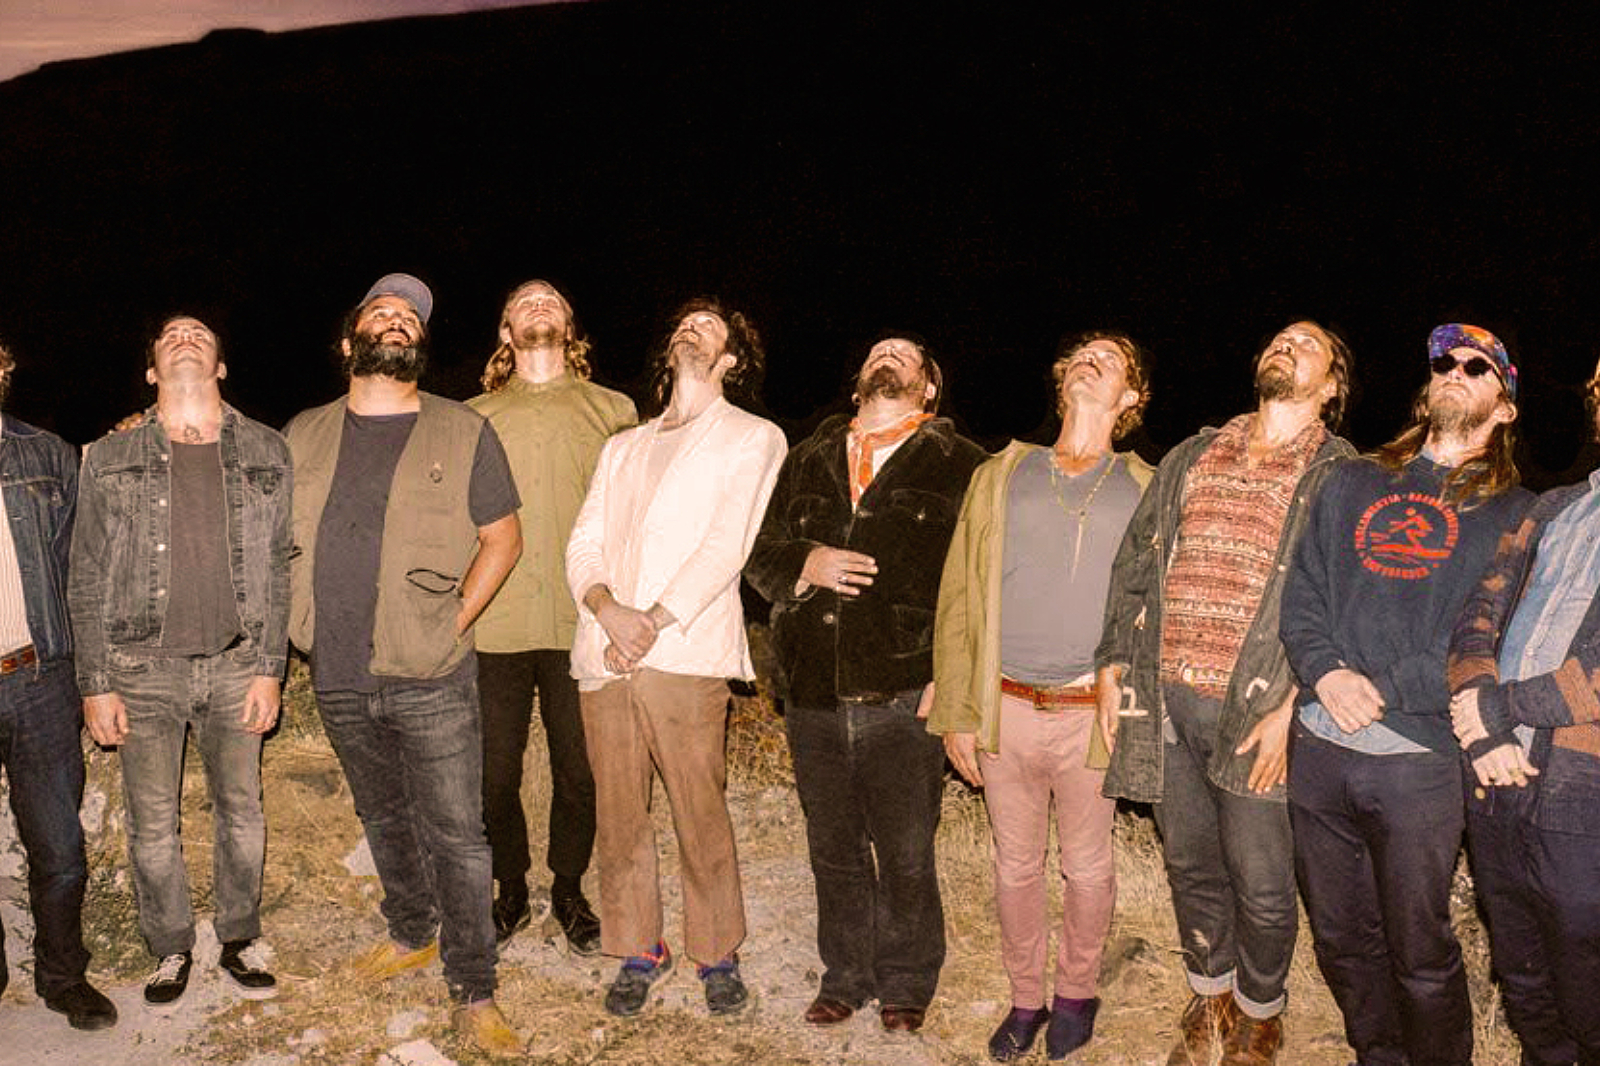 Edward Sharpe & the Magnetic Zeros, Slow Club added to Green Man 2016